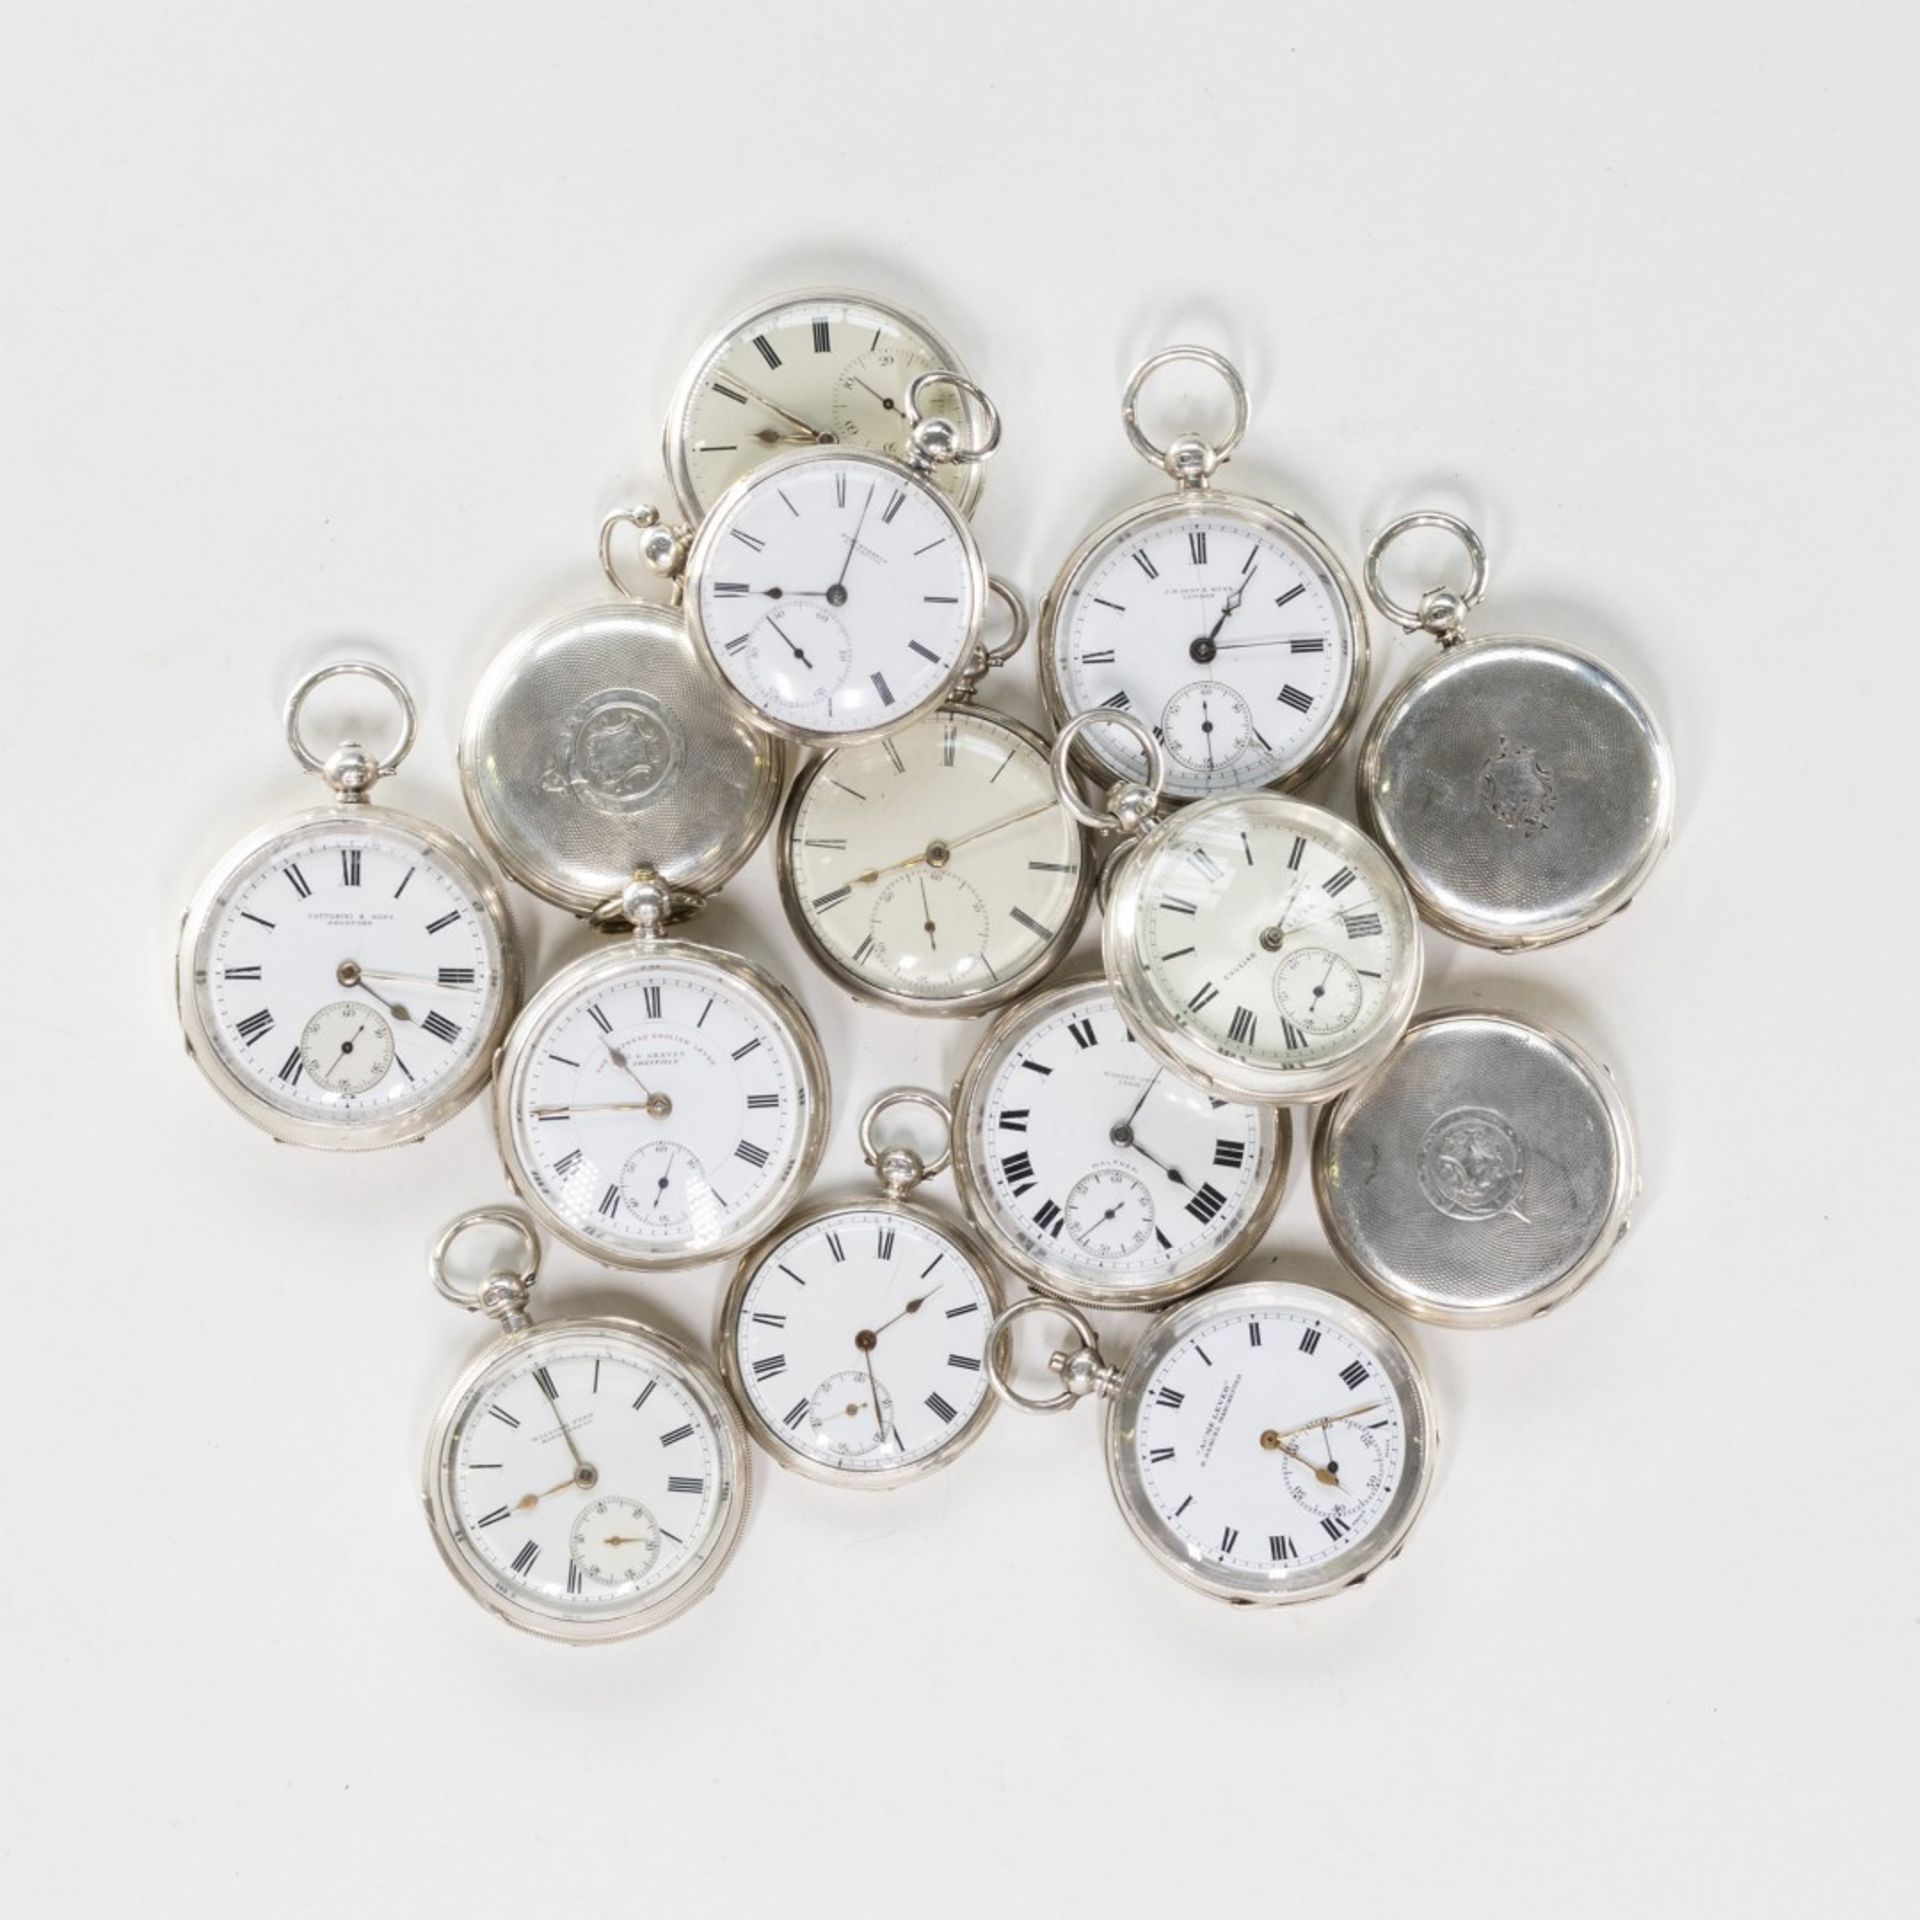 LOT OF 14 ENGLISH POCKET WATCHES